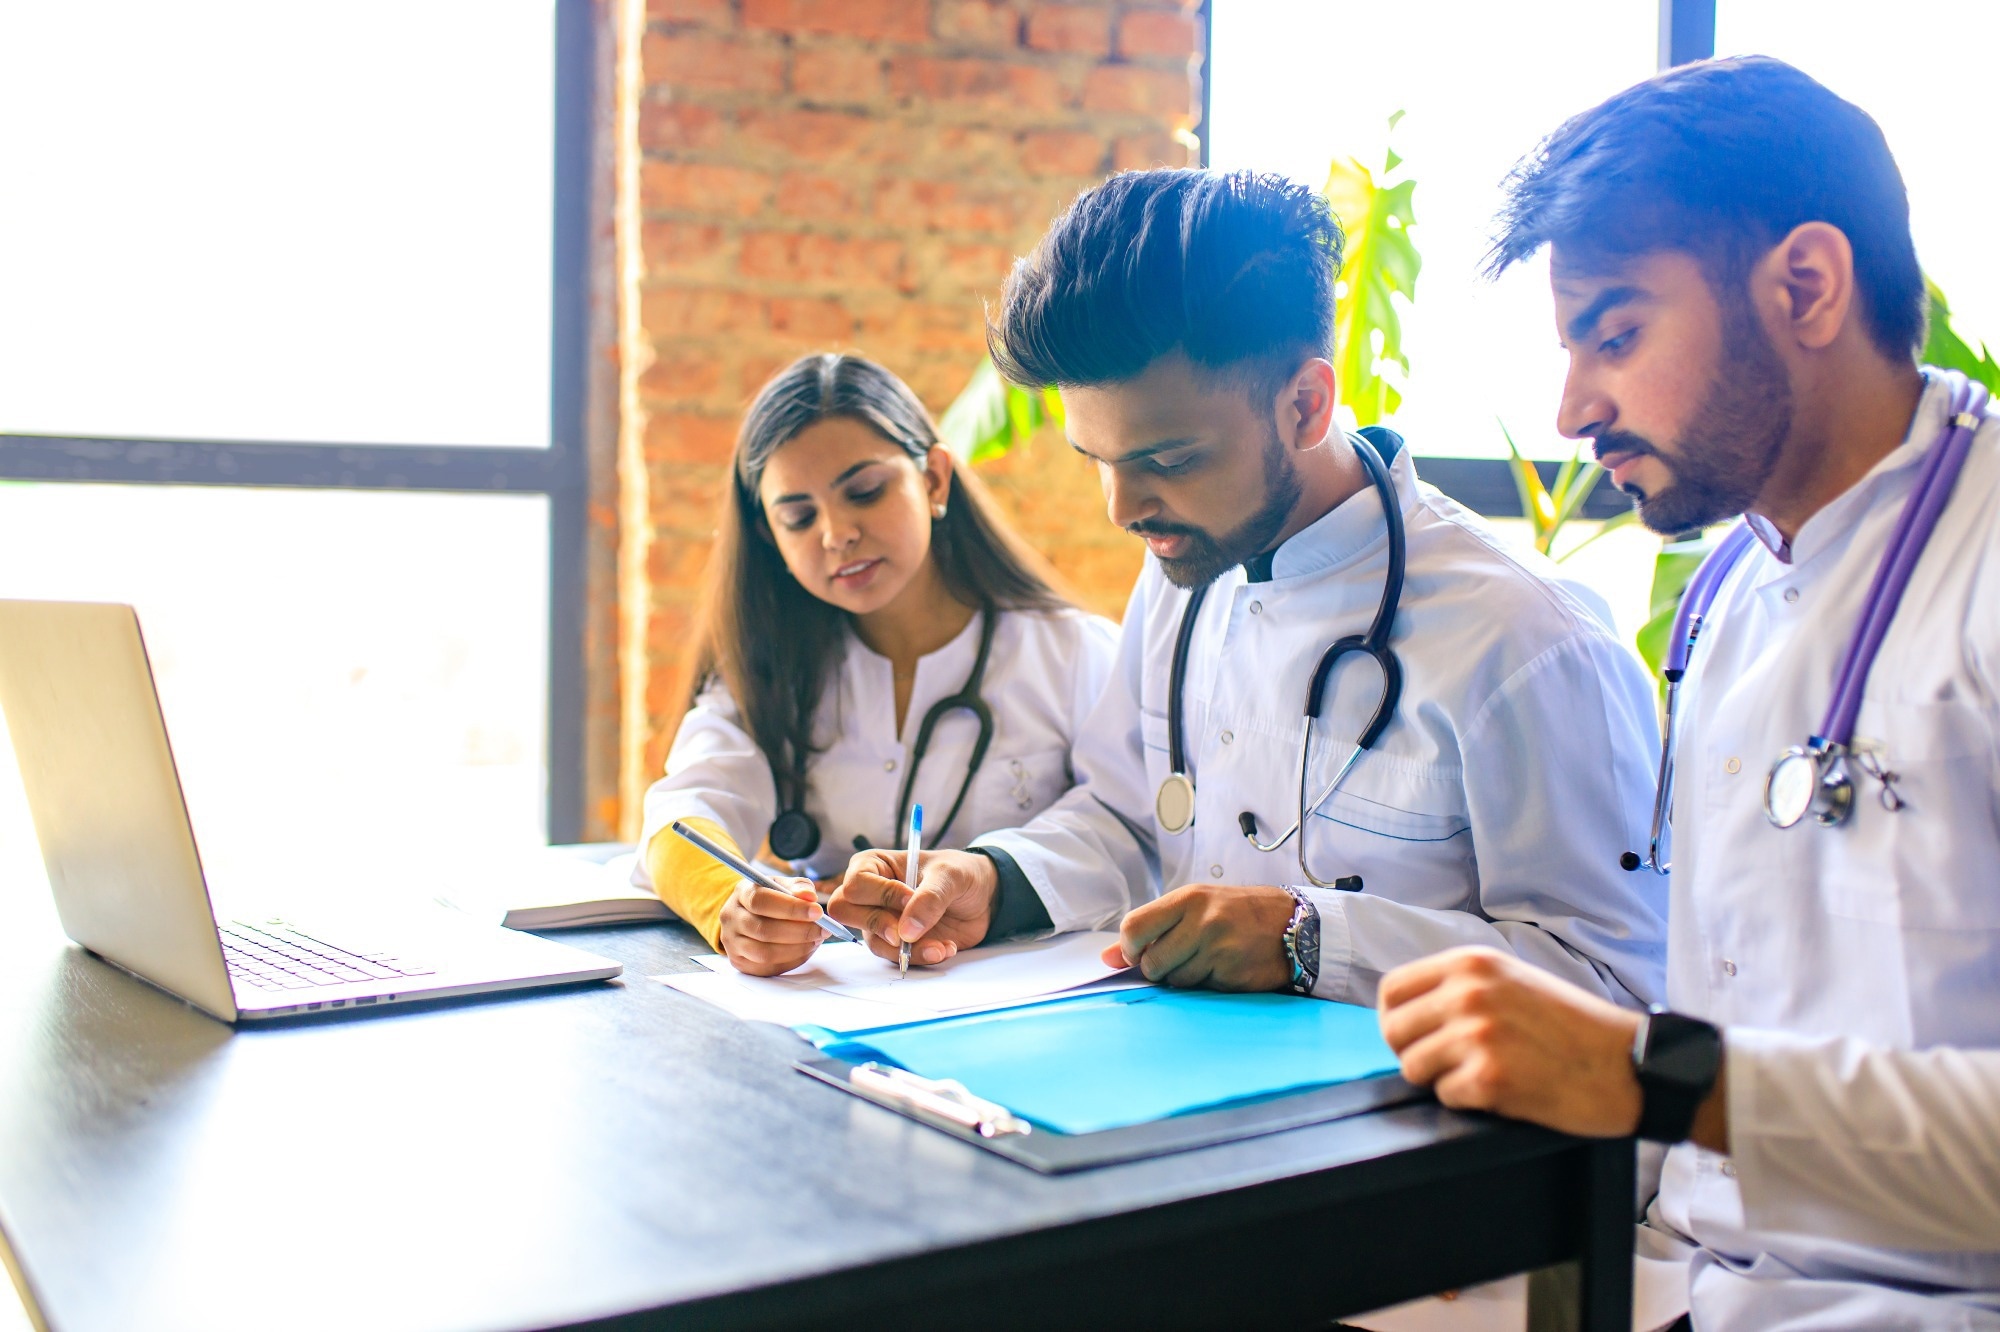 Study: Which educational messengers do medical students prefer for receiving healthinformation? Development and psychometrics of using health messengers questionnaire. Image Credit: yurakrasil/Shutterstock.com